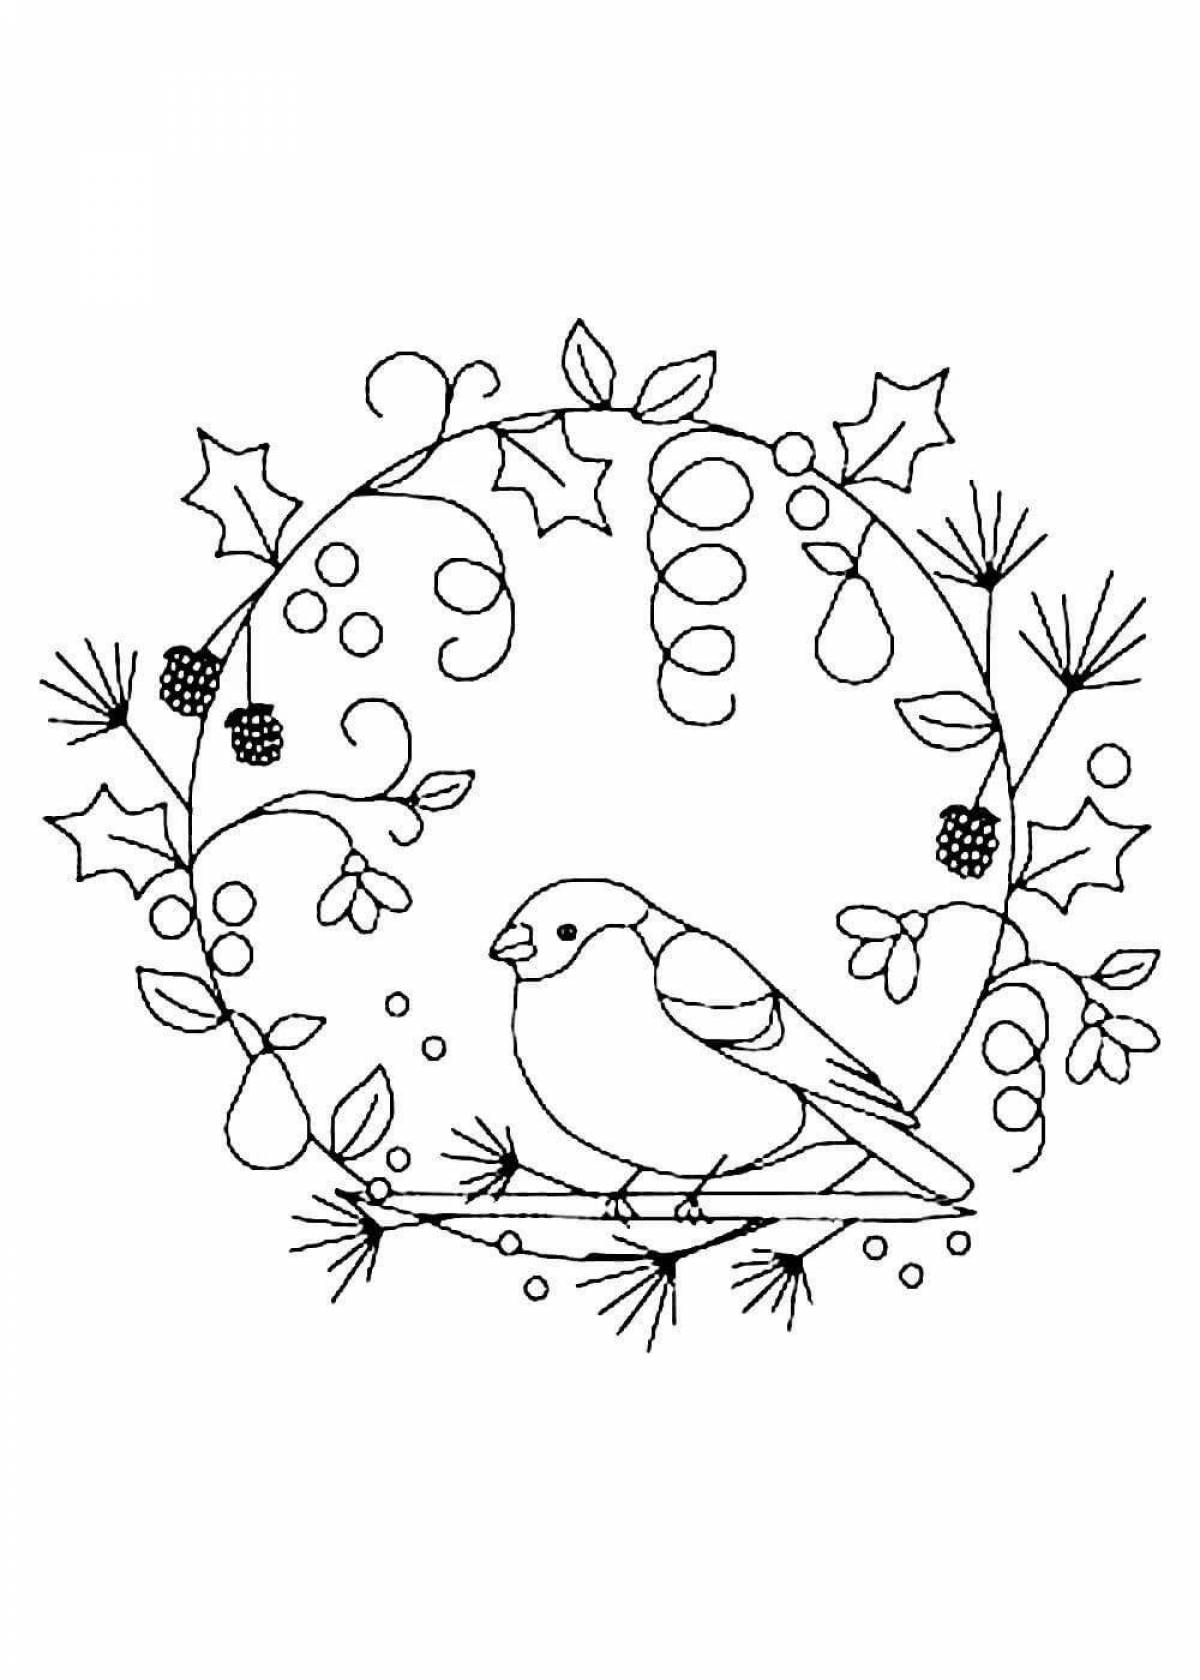 Drawing of a magical bullfinch on a branch